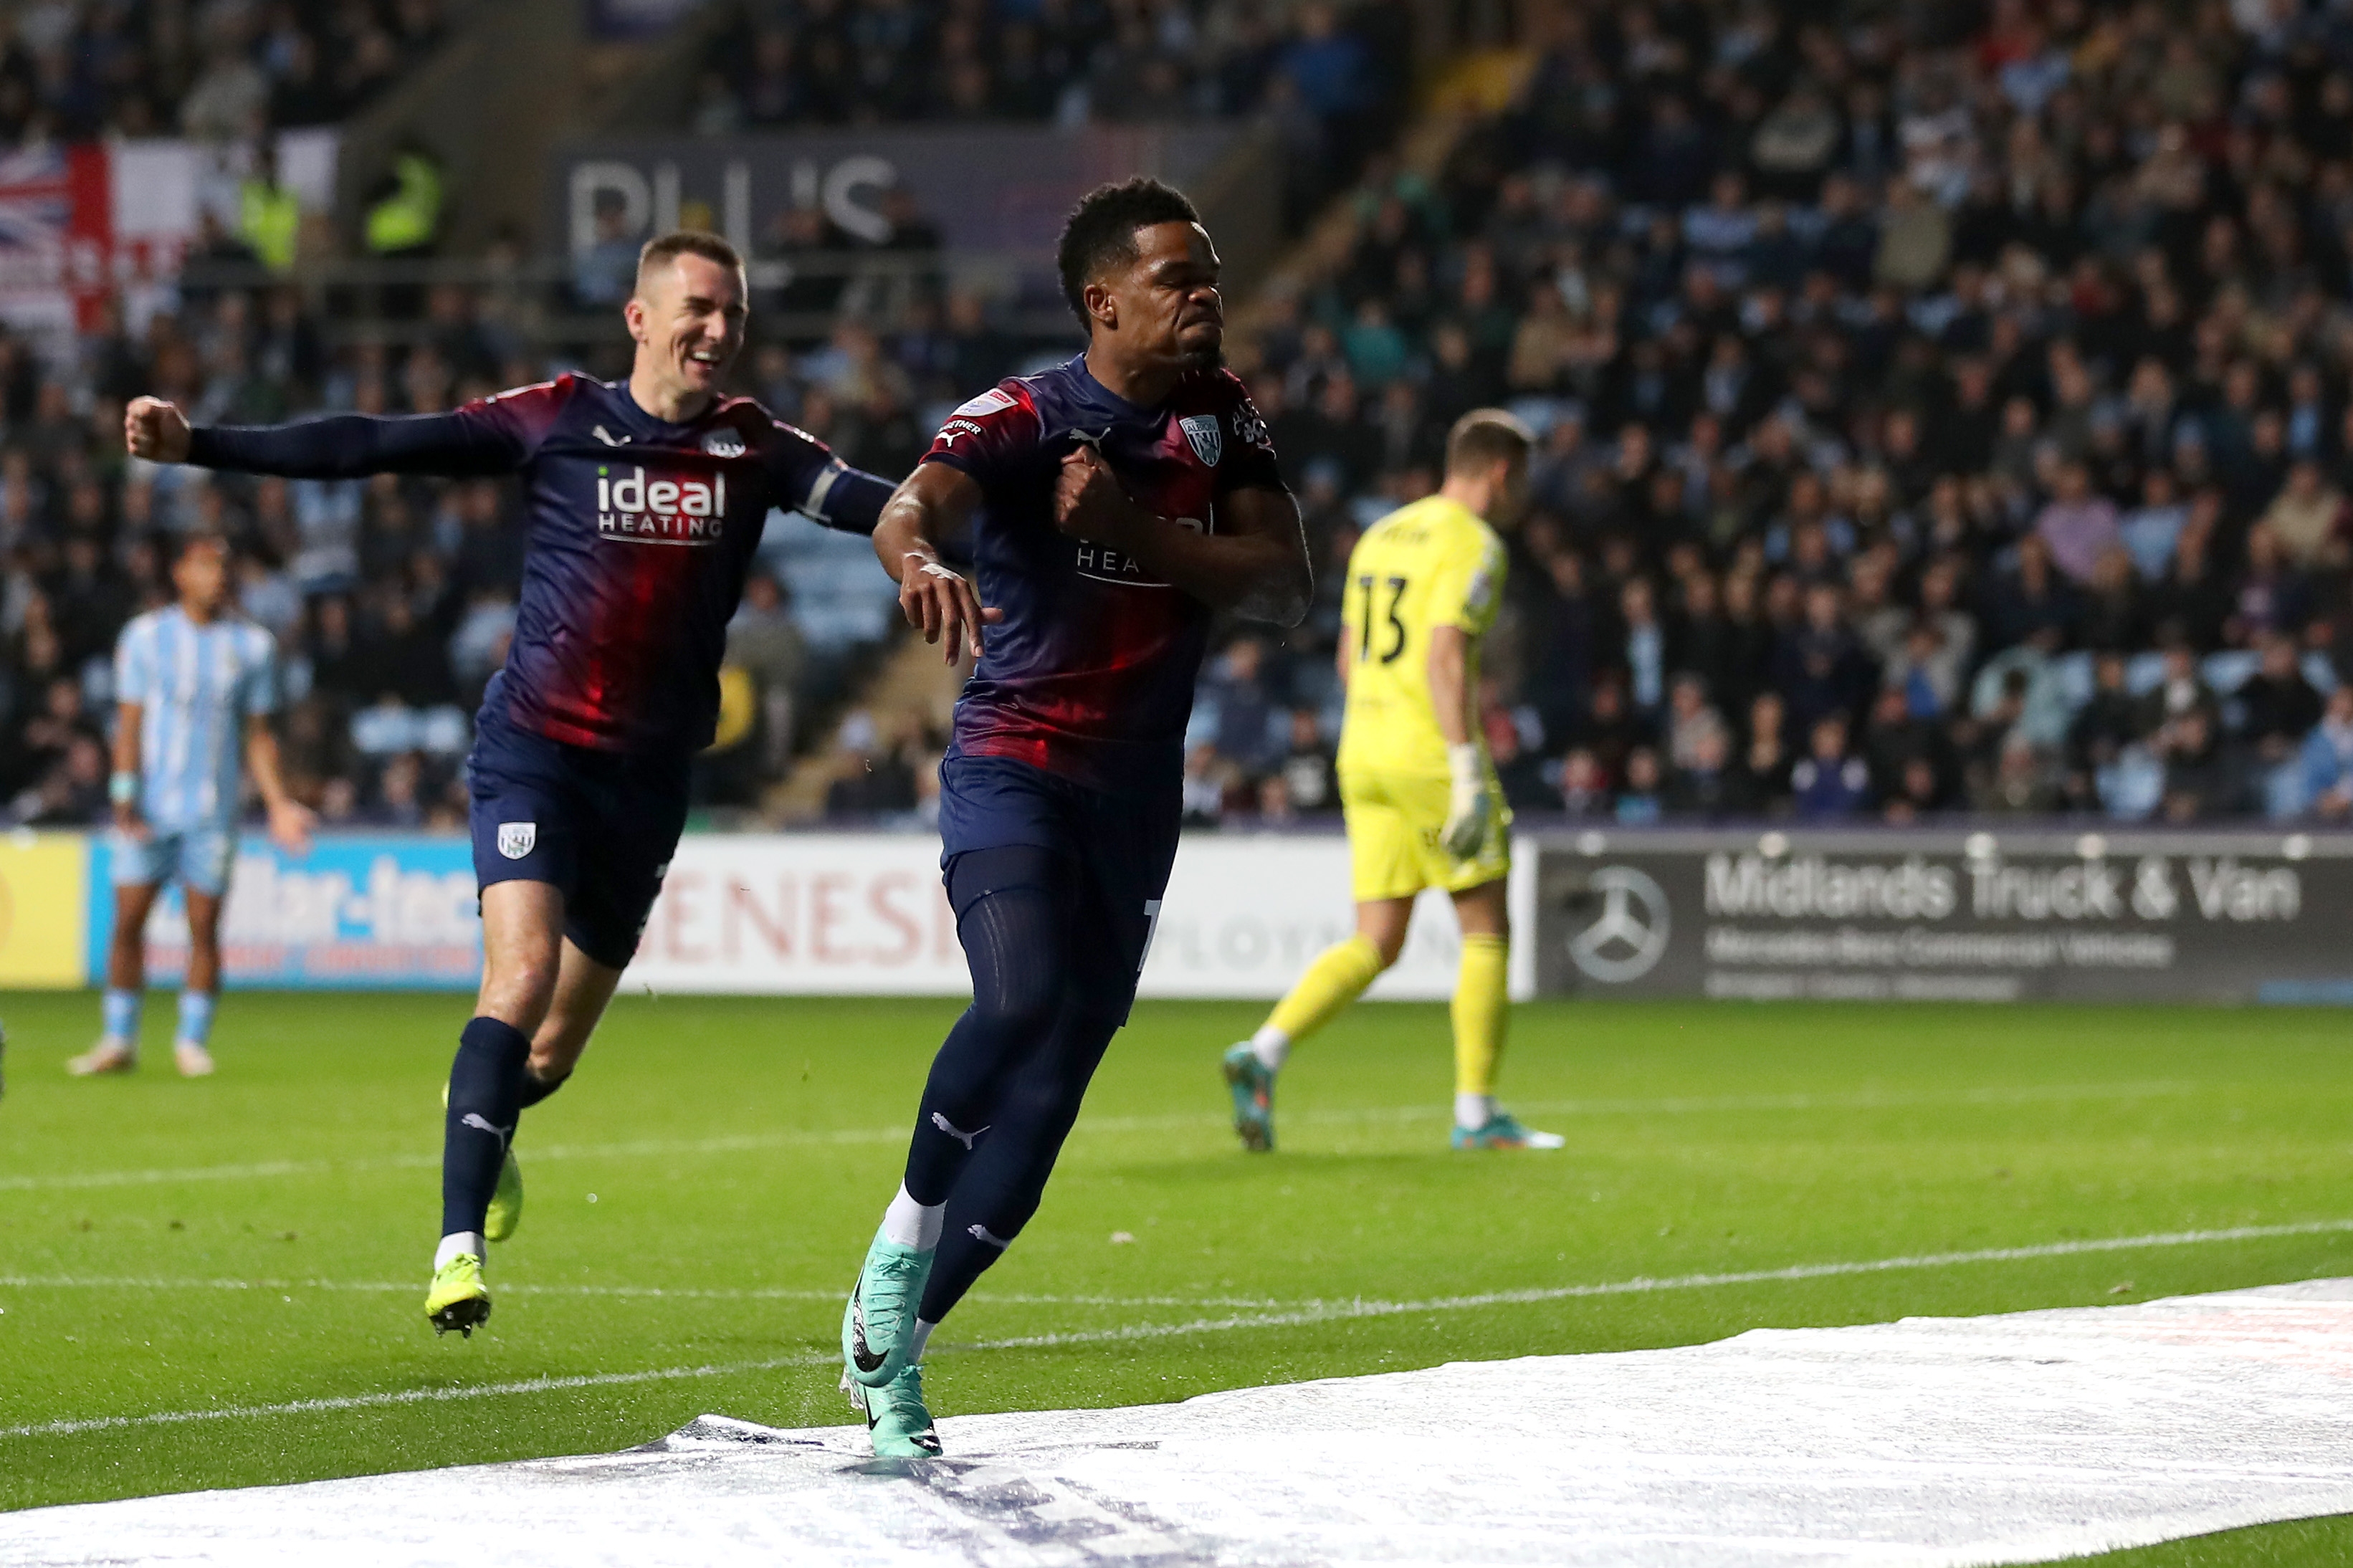 Grady Diangana celebrates scoring against Coventry with Jed Wallace in the background 